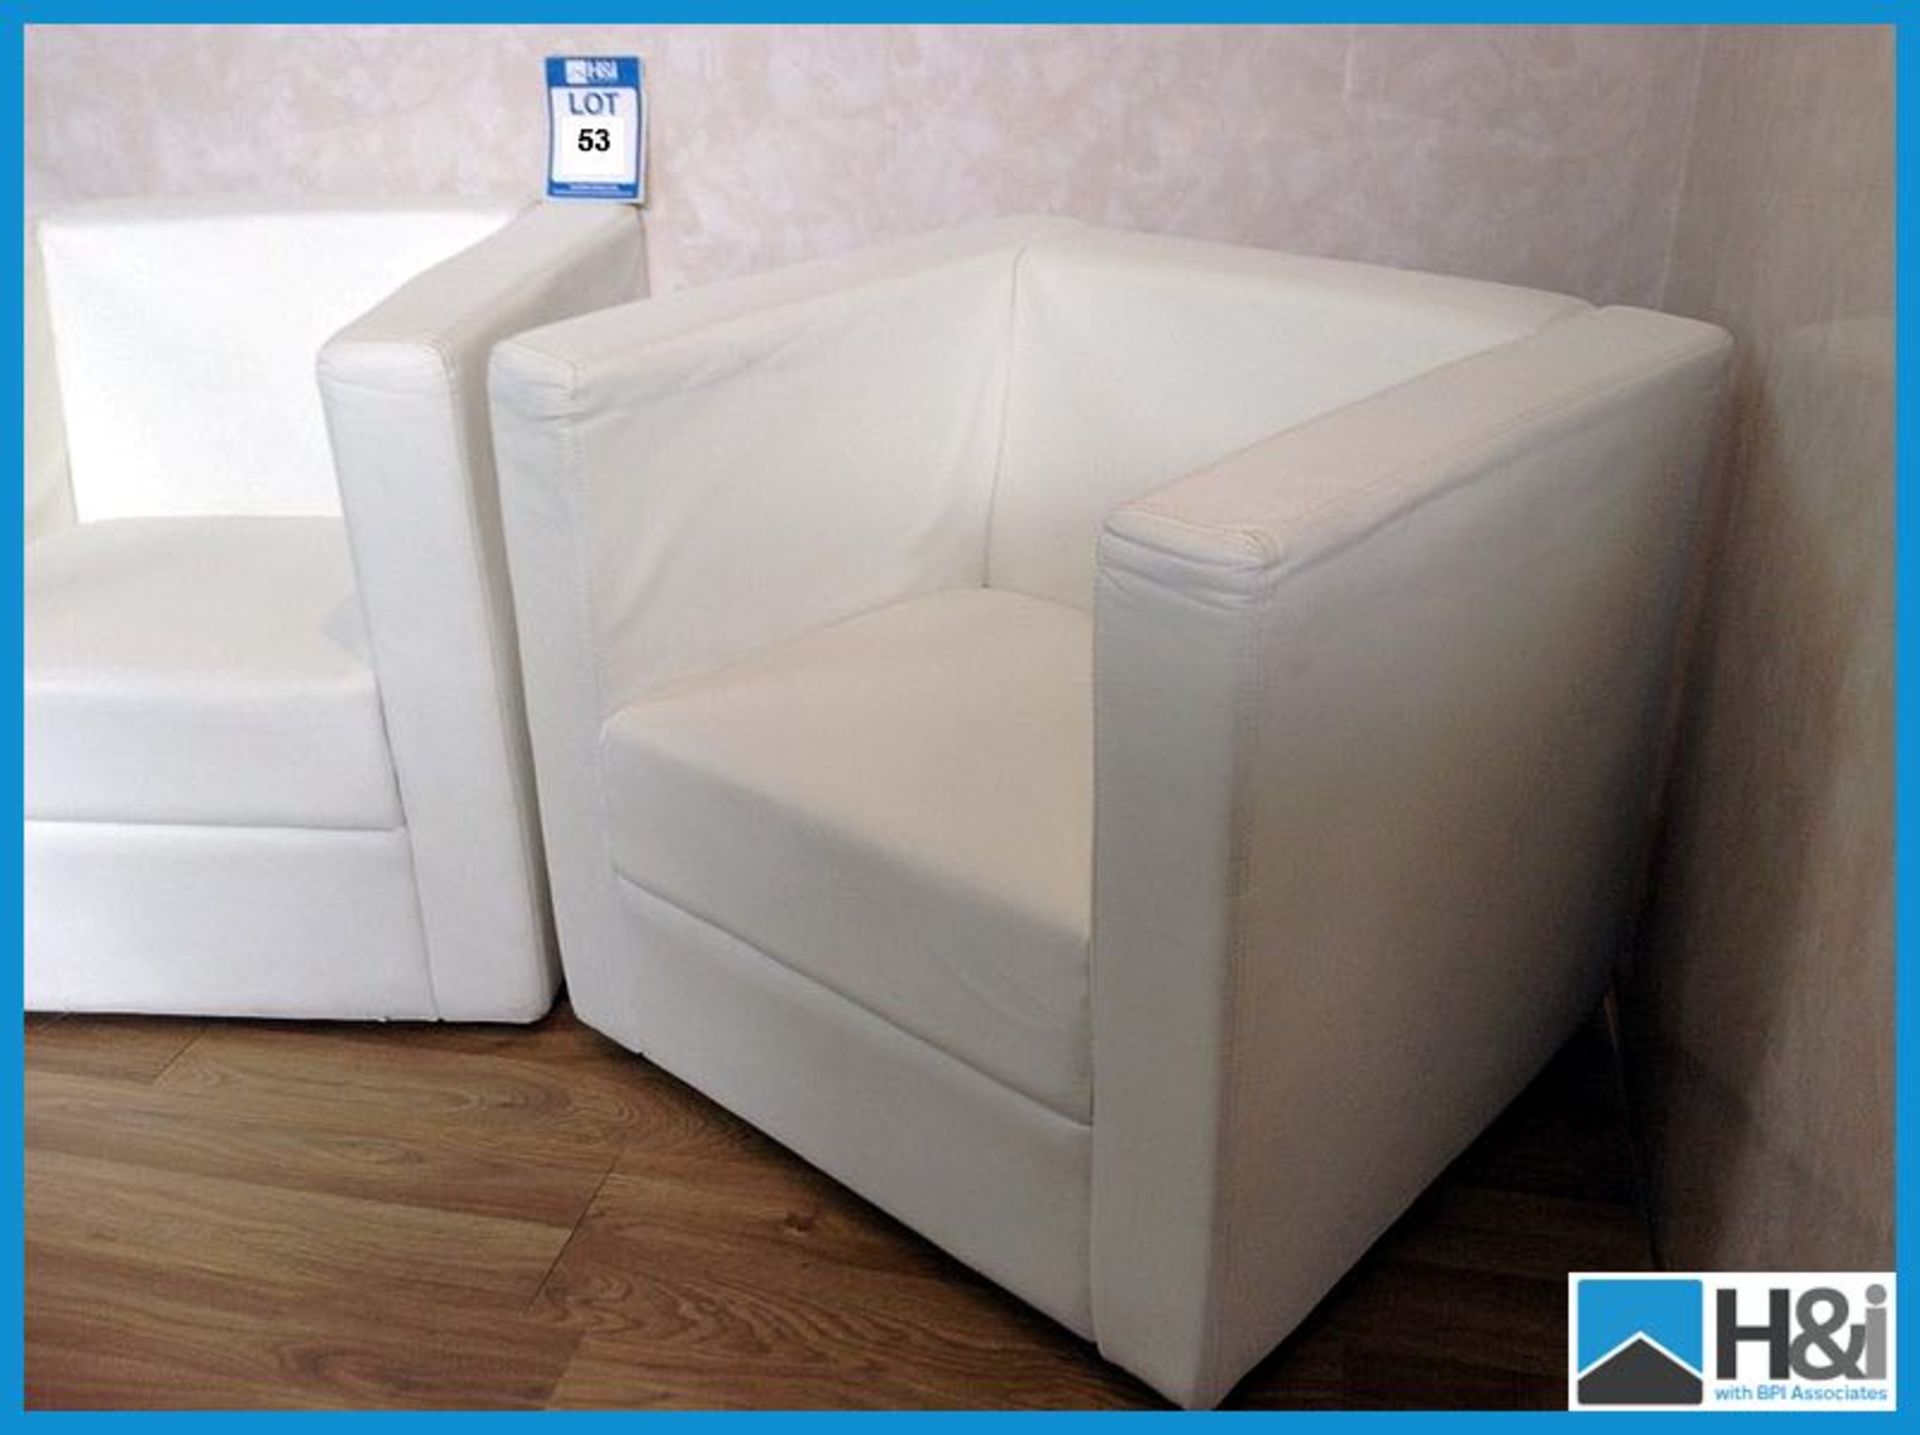 Ultra Modern White leather cube chair pair - L15 Appraisal: Good Serial No: NA Location: Identihire, - Image 2 of 2